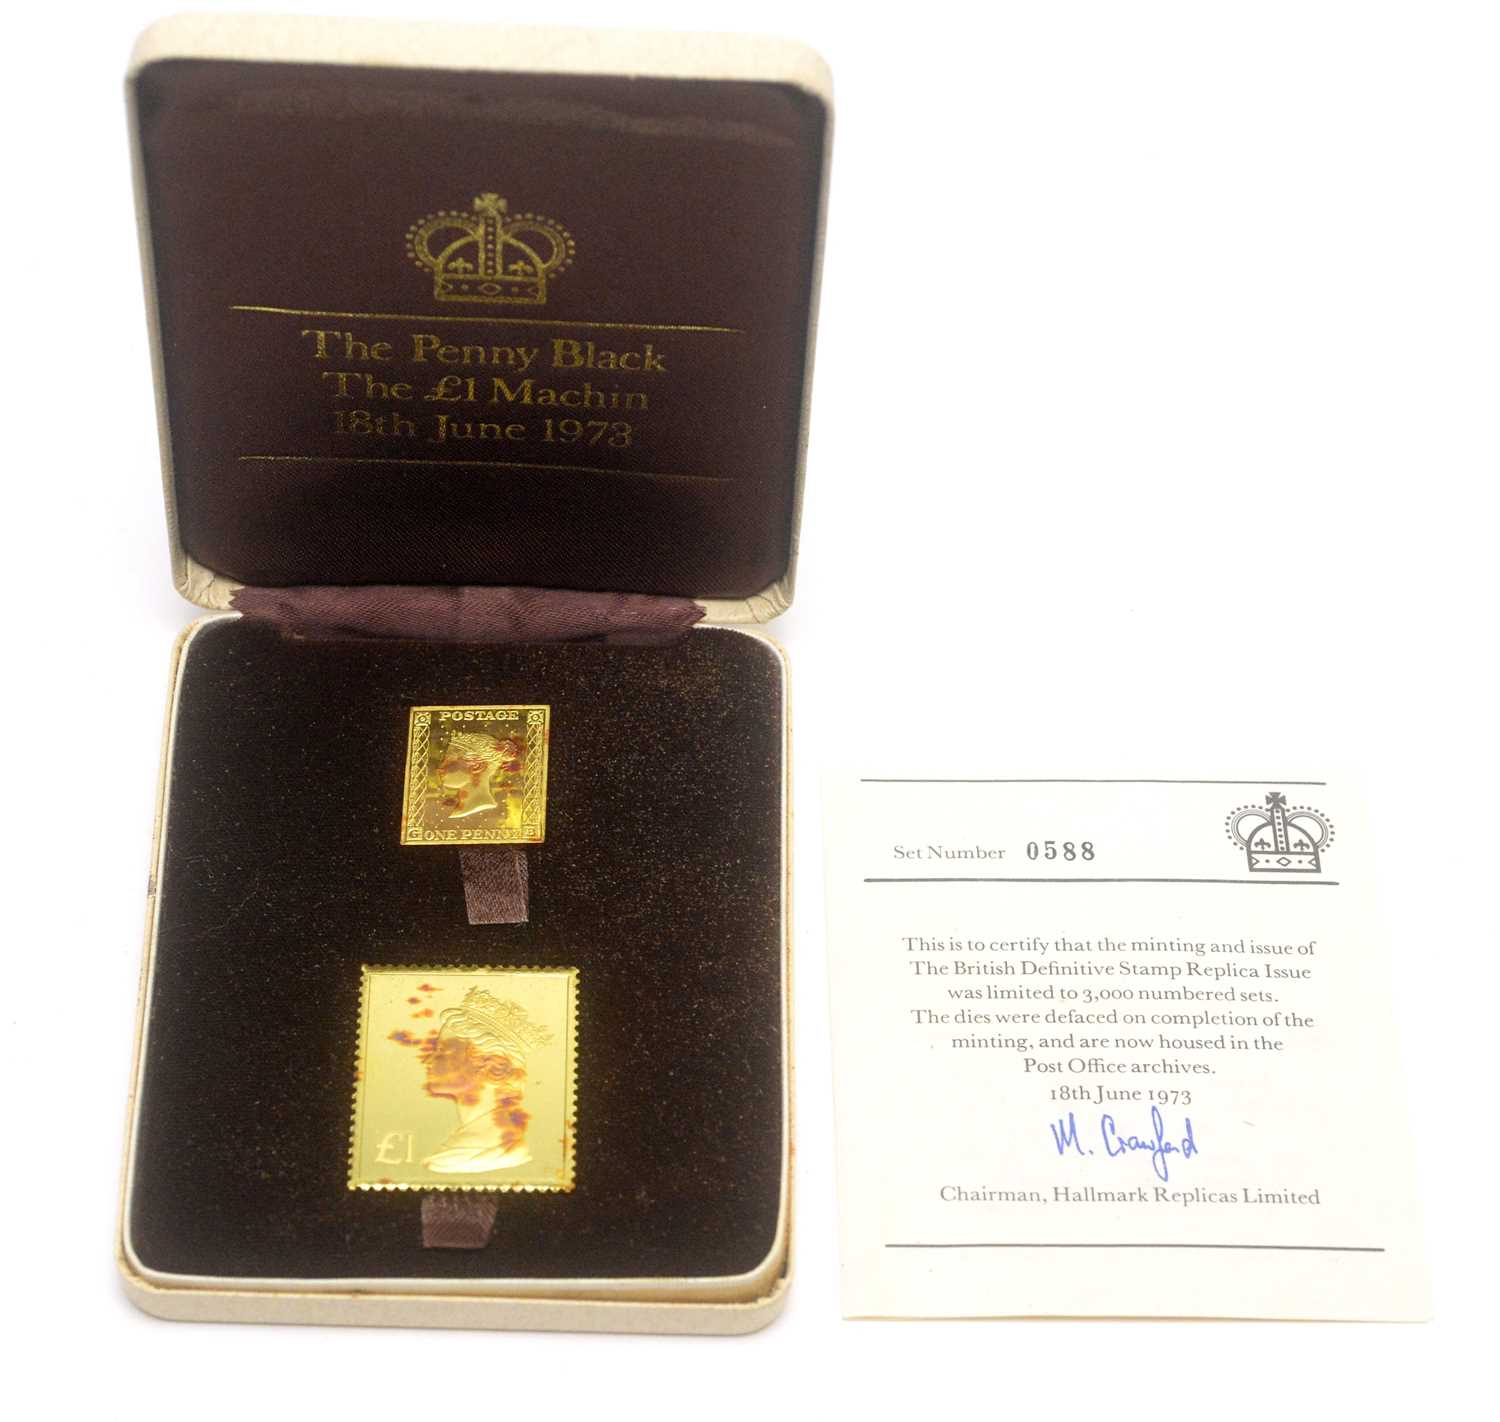 959 - Hallmarks Replica Limited The Penny Black and The £1 Machin stamp replicas,